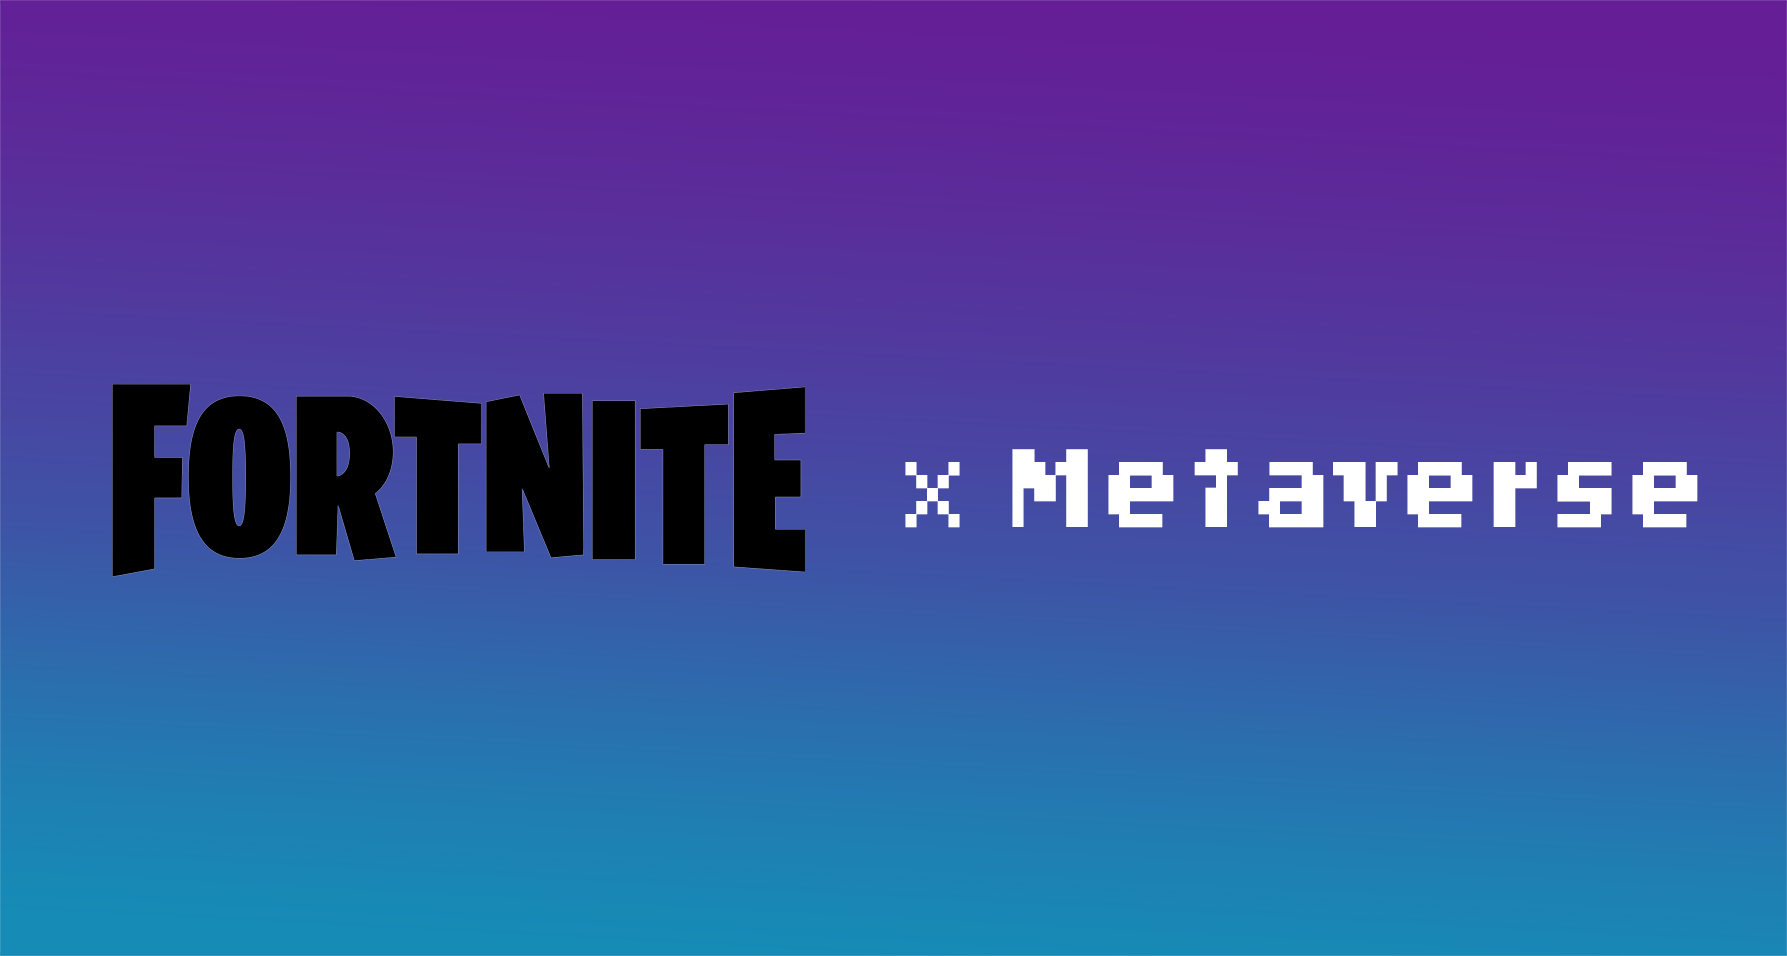 What is the Fortnite’s Metaverse?